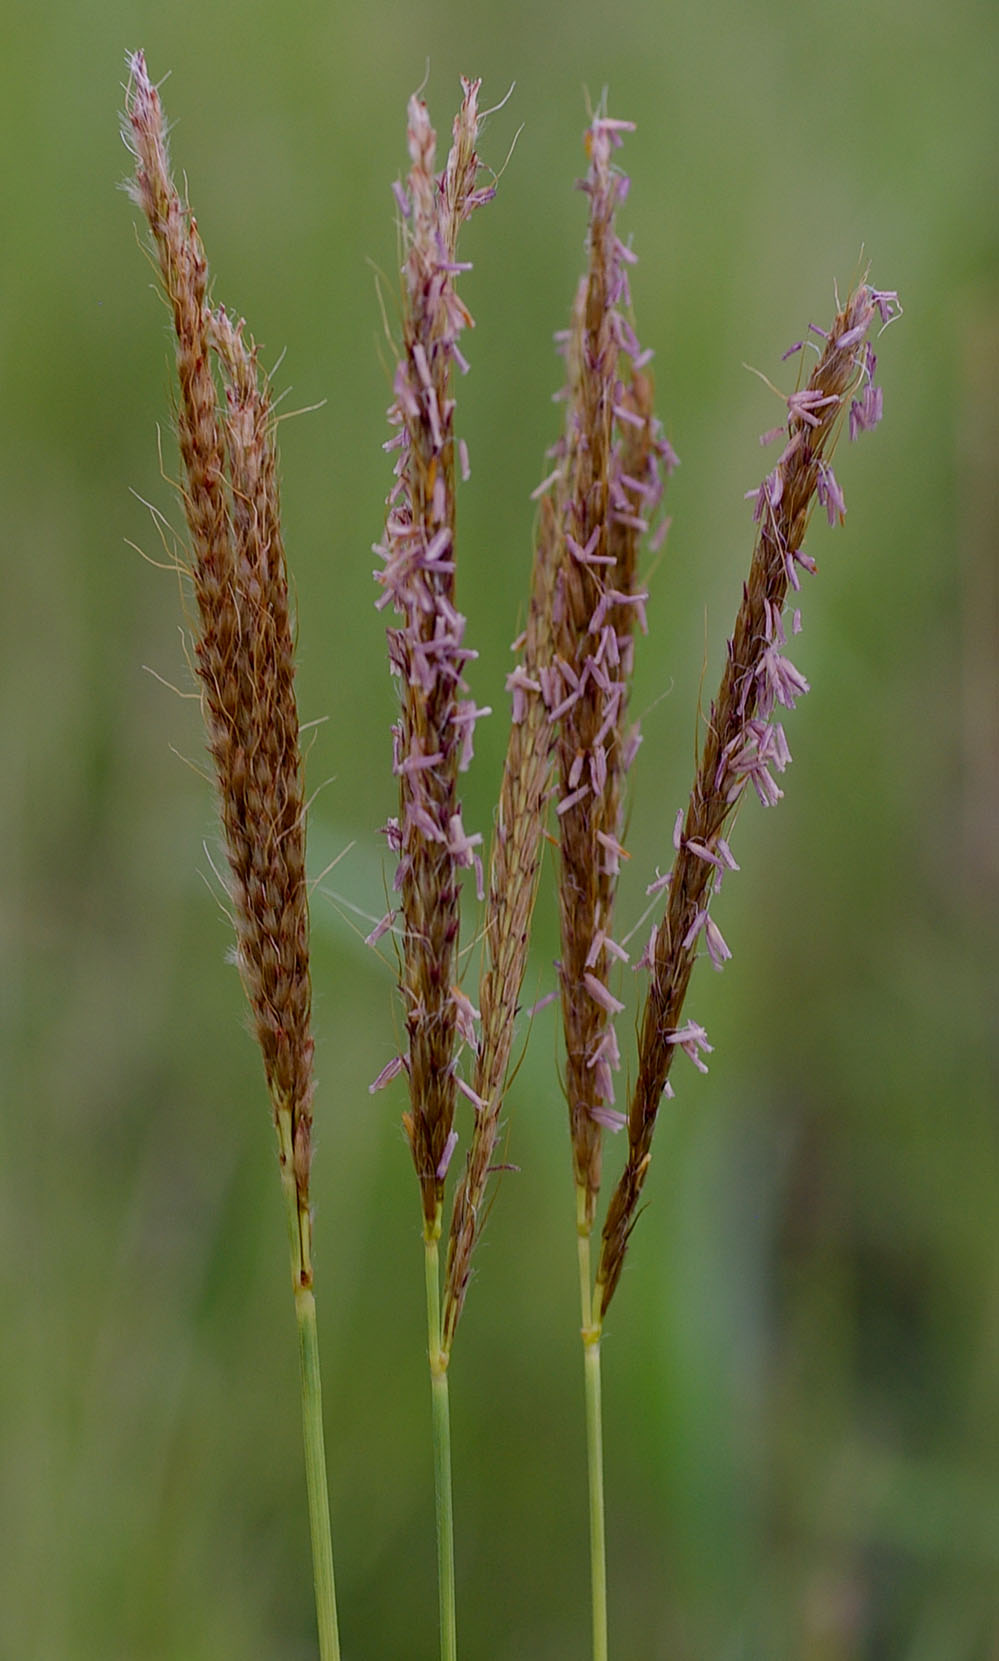 Fig. 11. Image of flowering head (inflorescence) of Eulalia aurea showing size and colour of spikelets and relative size of awns. (CC By: RJCummming d17483a)